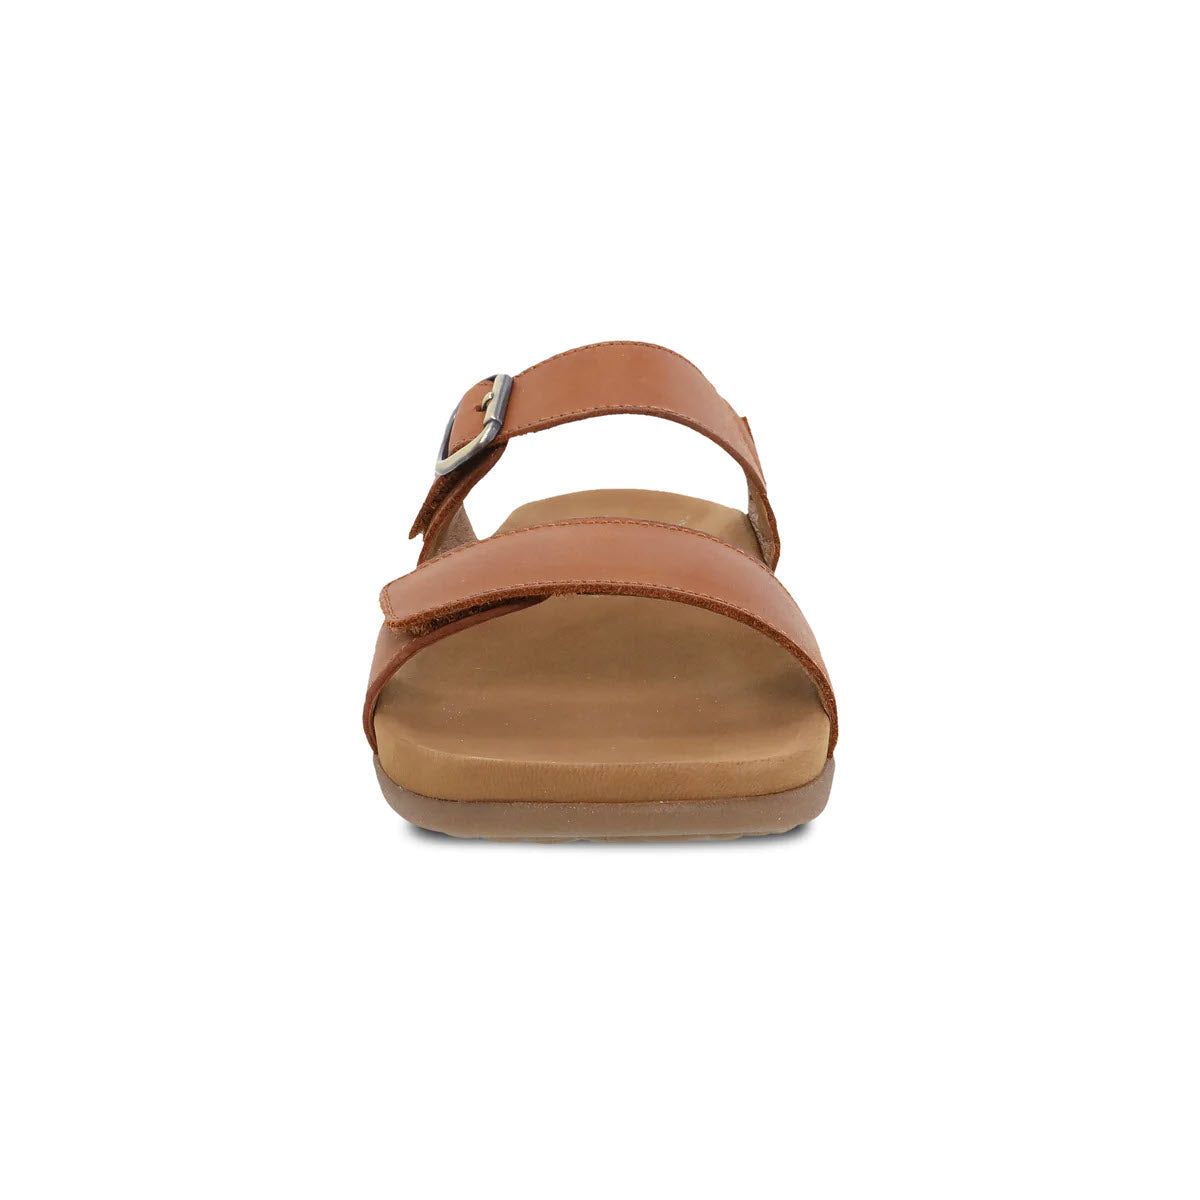 A single brown leather Dansko Justine Luggage slide sandal with a strap around the big toe and adjustable ankle buckle, viewed from the front against a white background.